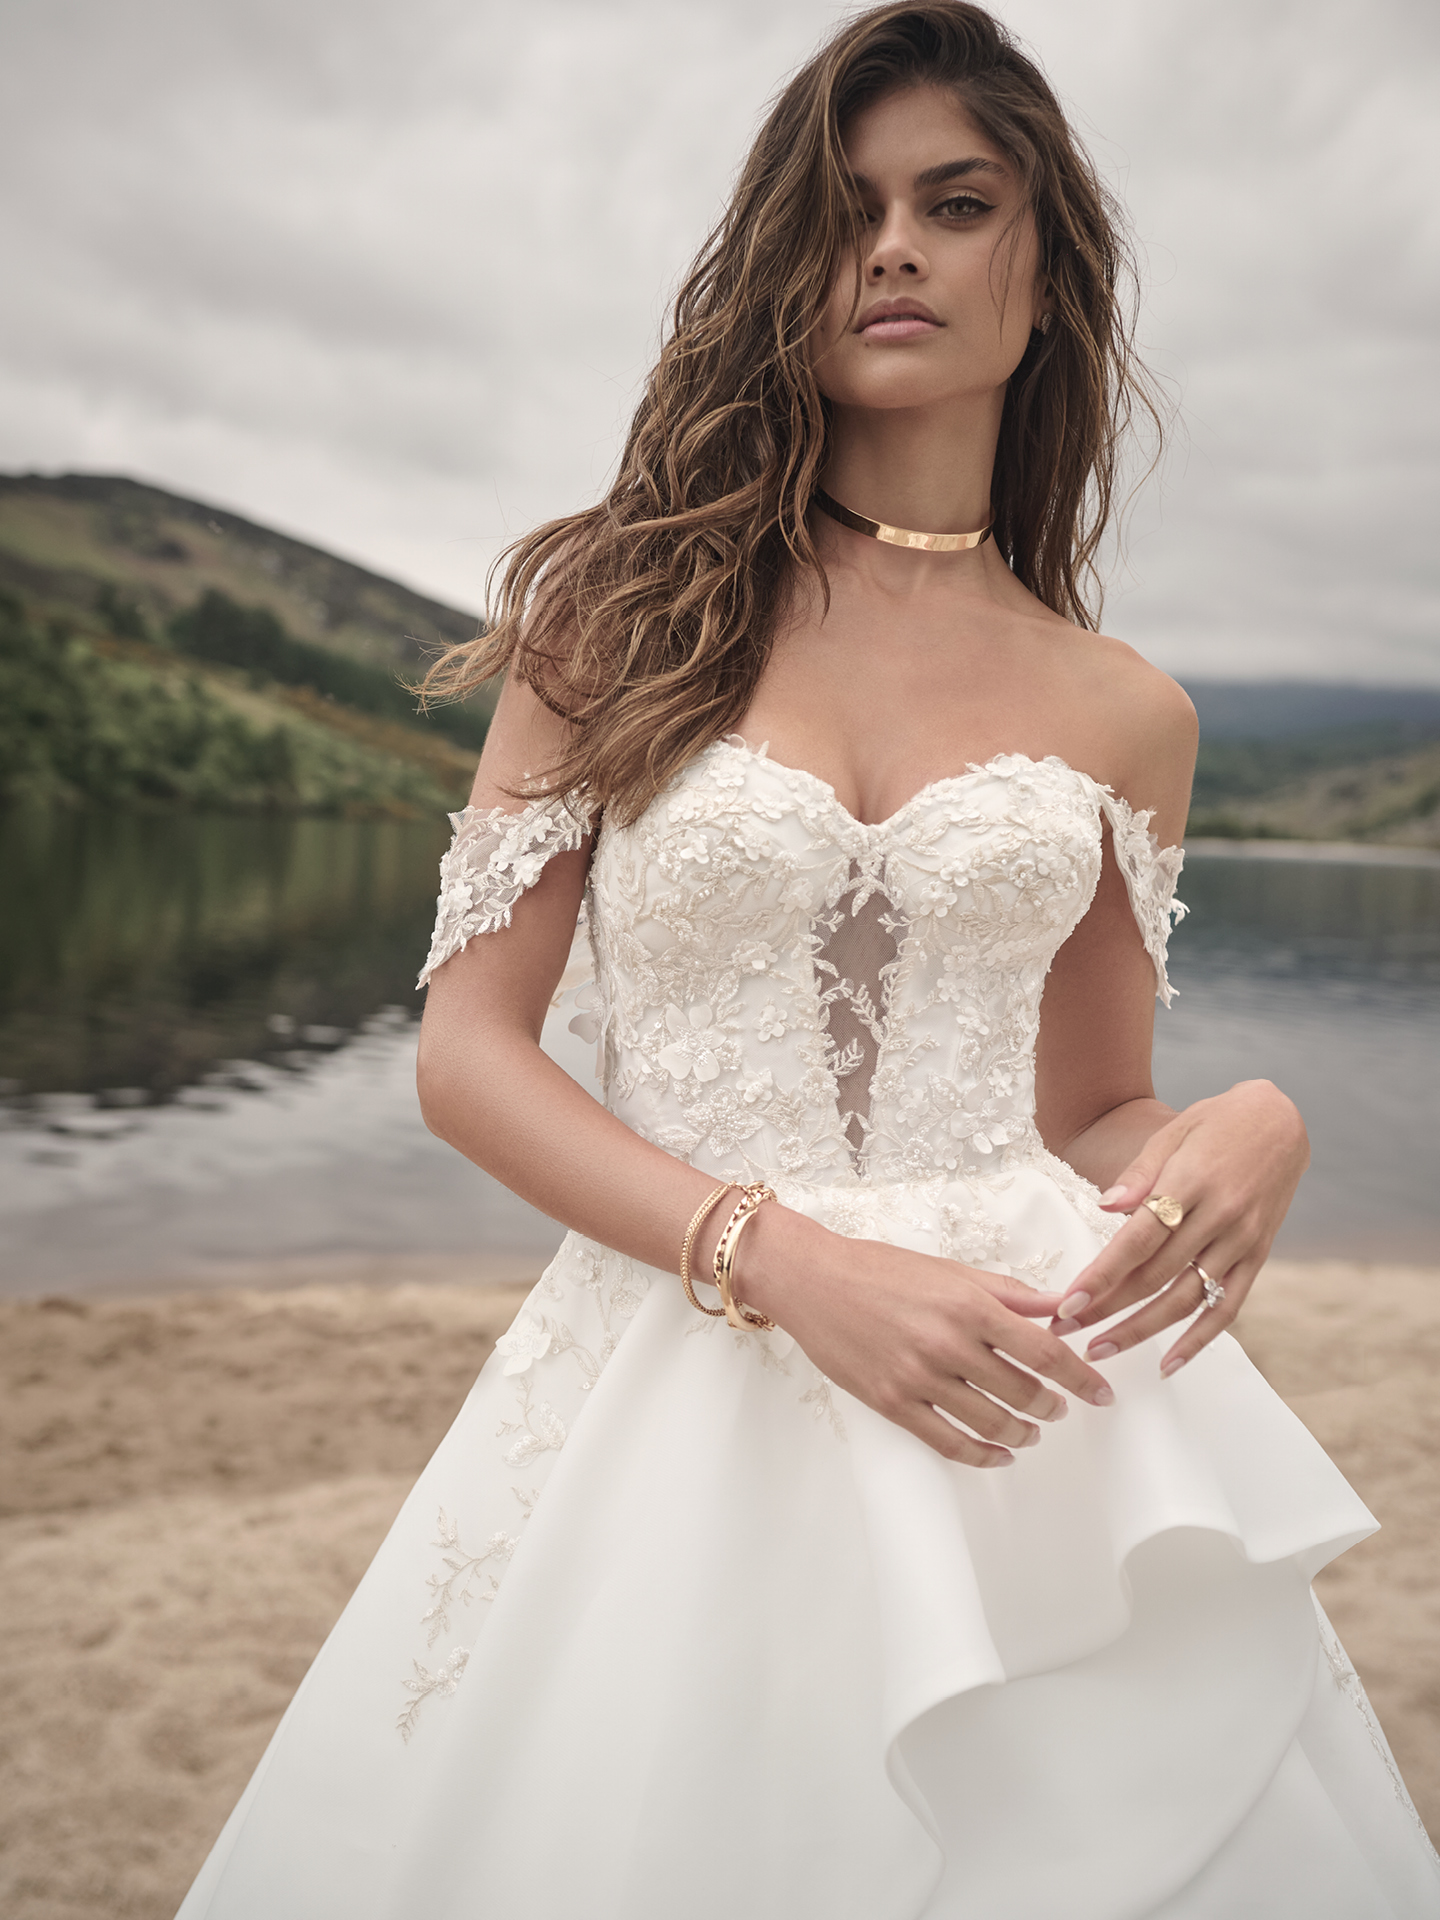 Bride In 3D Floral Wedding Dress Called Knox By Sottero And Midgley